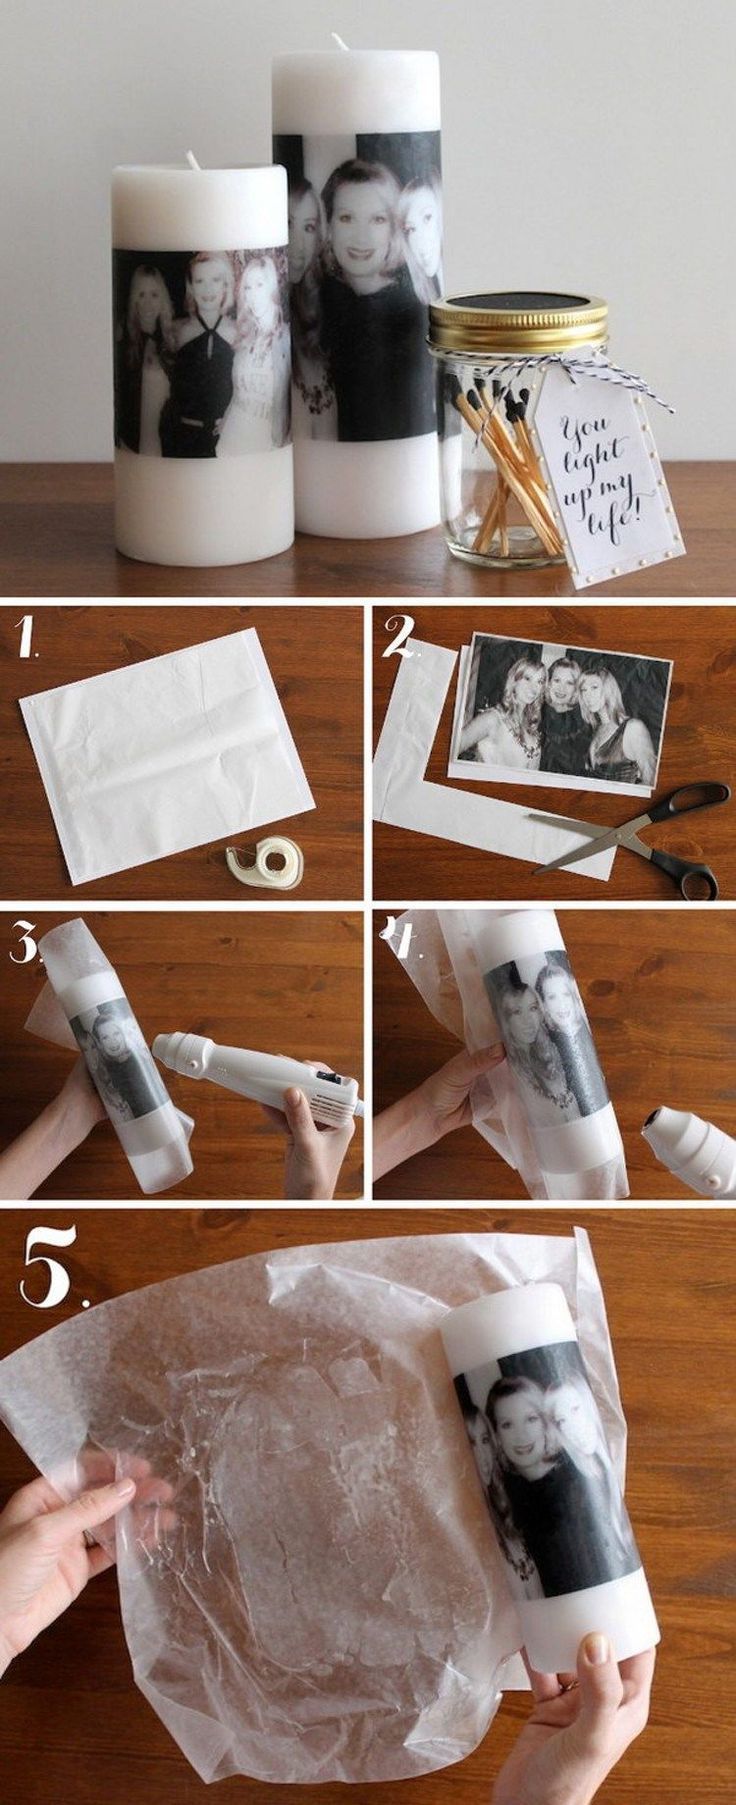 56 Genius Gift Wrapping Ideas to Try This Holiday Season - 56 Genius Gift Wrapping Ideas to Try This Holiday Season -   19 diy Easy gifts ideas